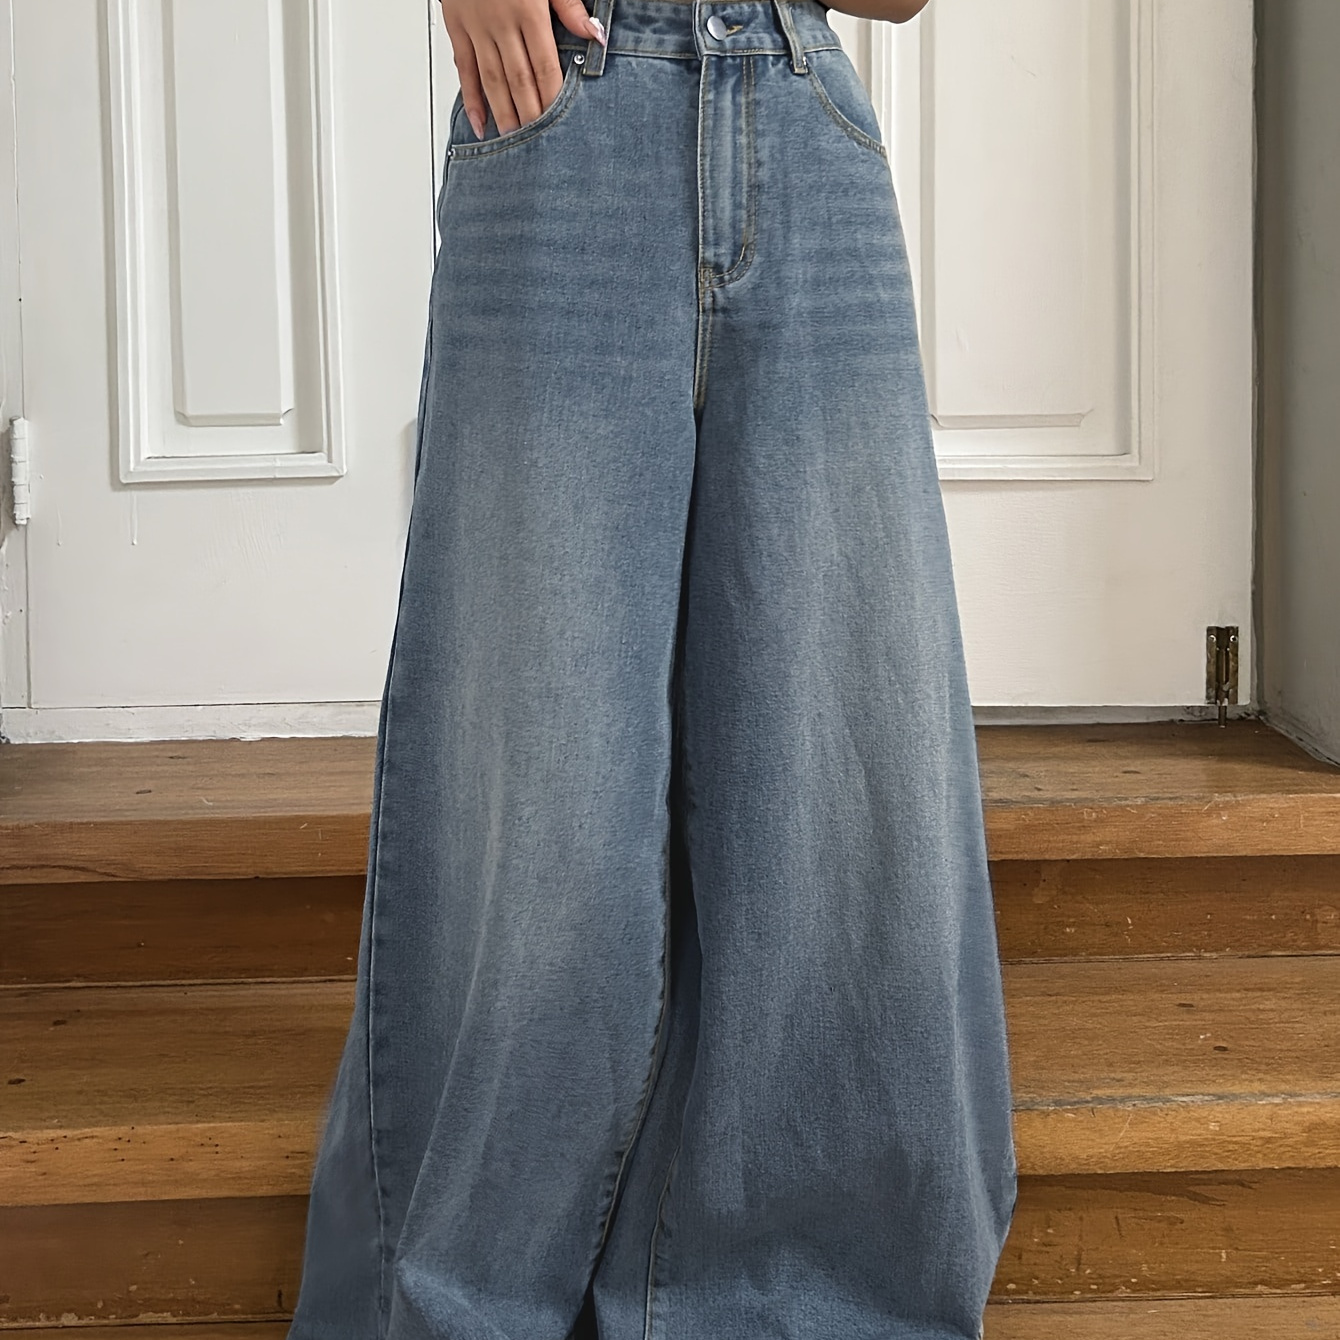 

High Waist Washed Wide Leg Floor-length Jeans, Loose Plicated Pattern Leisure Denim Pants, Women's Denim Jeans & Clothing For Fall & Winter